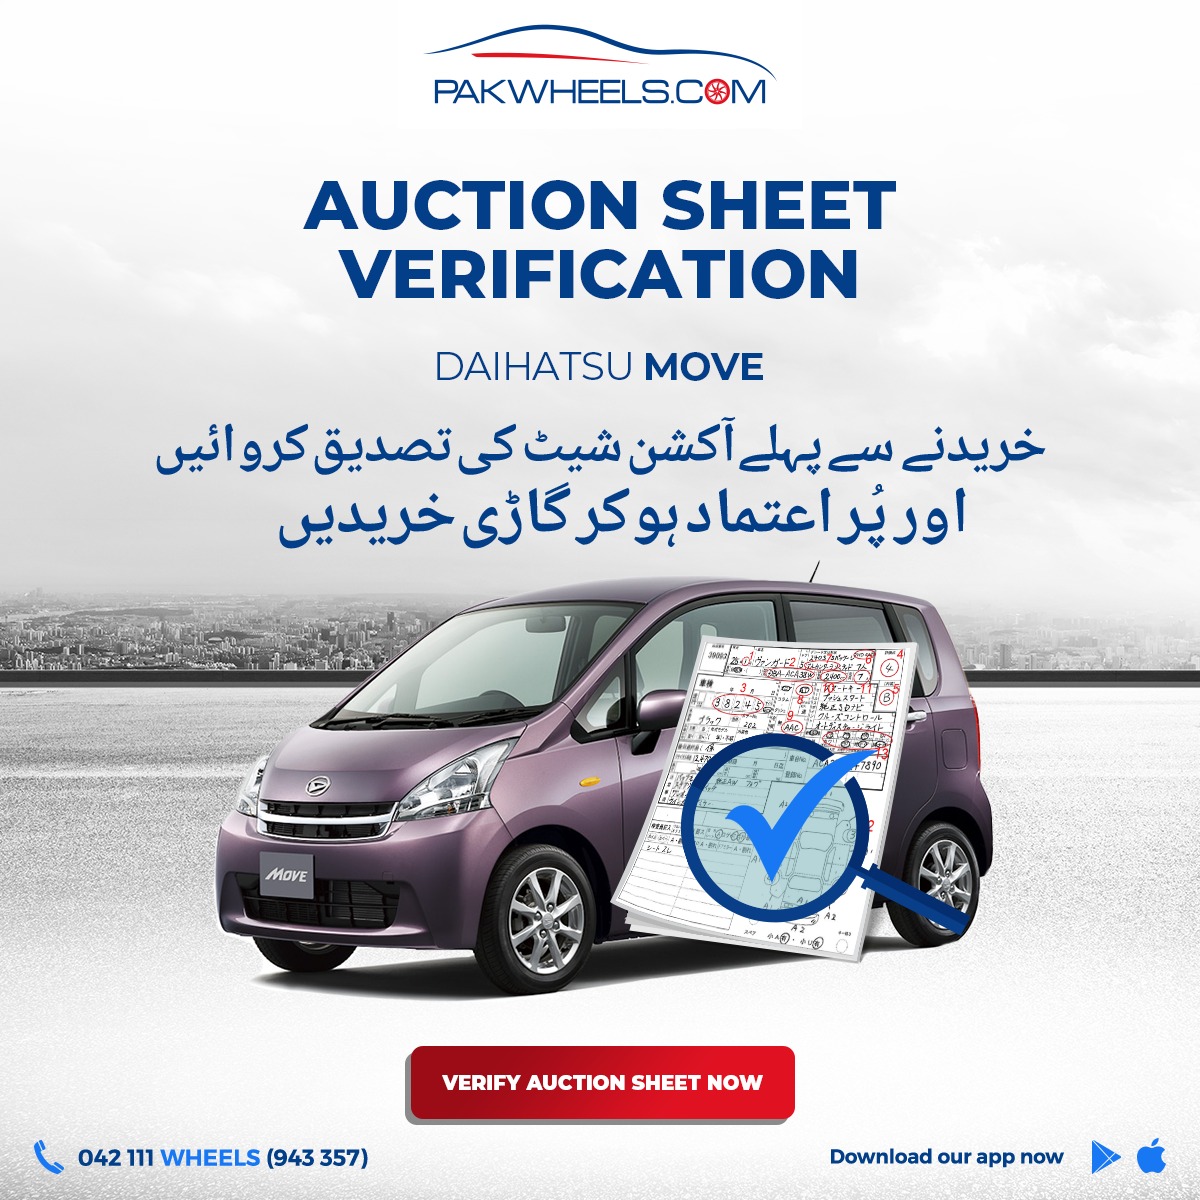 Looking to buy 660cc car?

Get your auction sheet verified: ow.ly/uNJa30mUEPf

#PakWheels #AuctionSheet #PWAuctionSheet